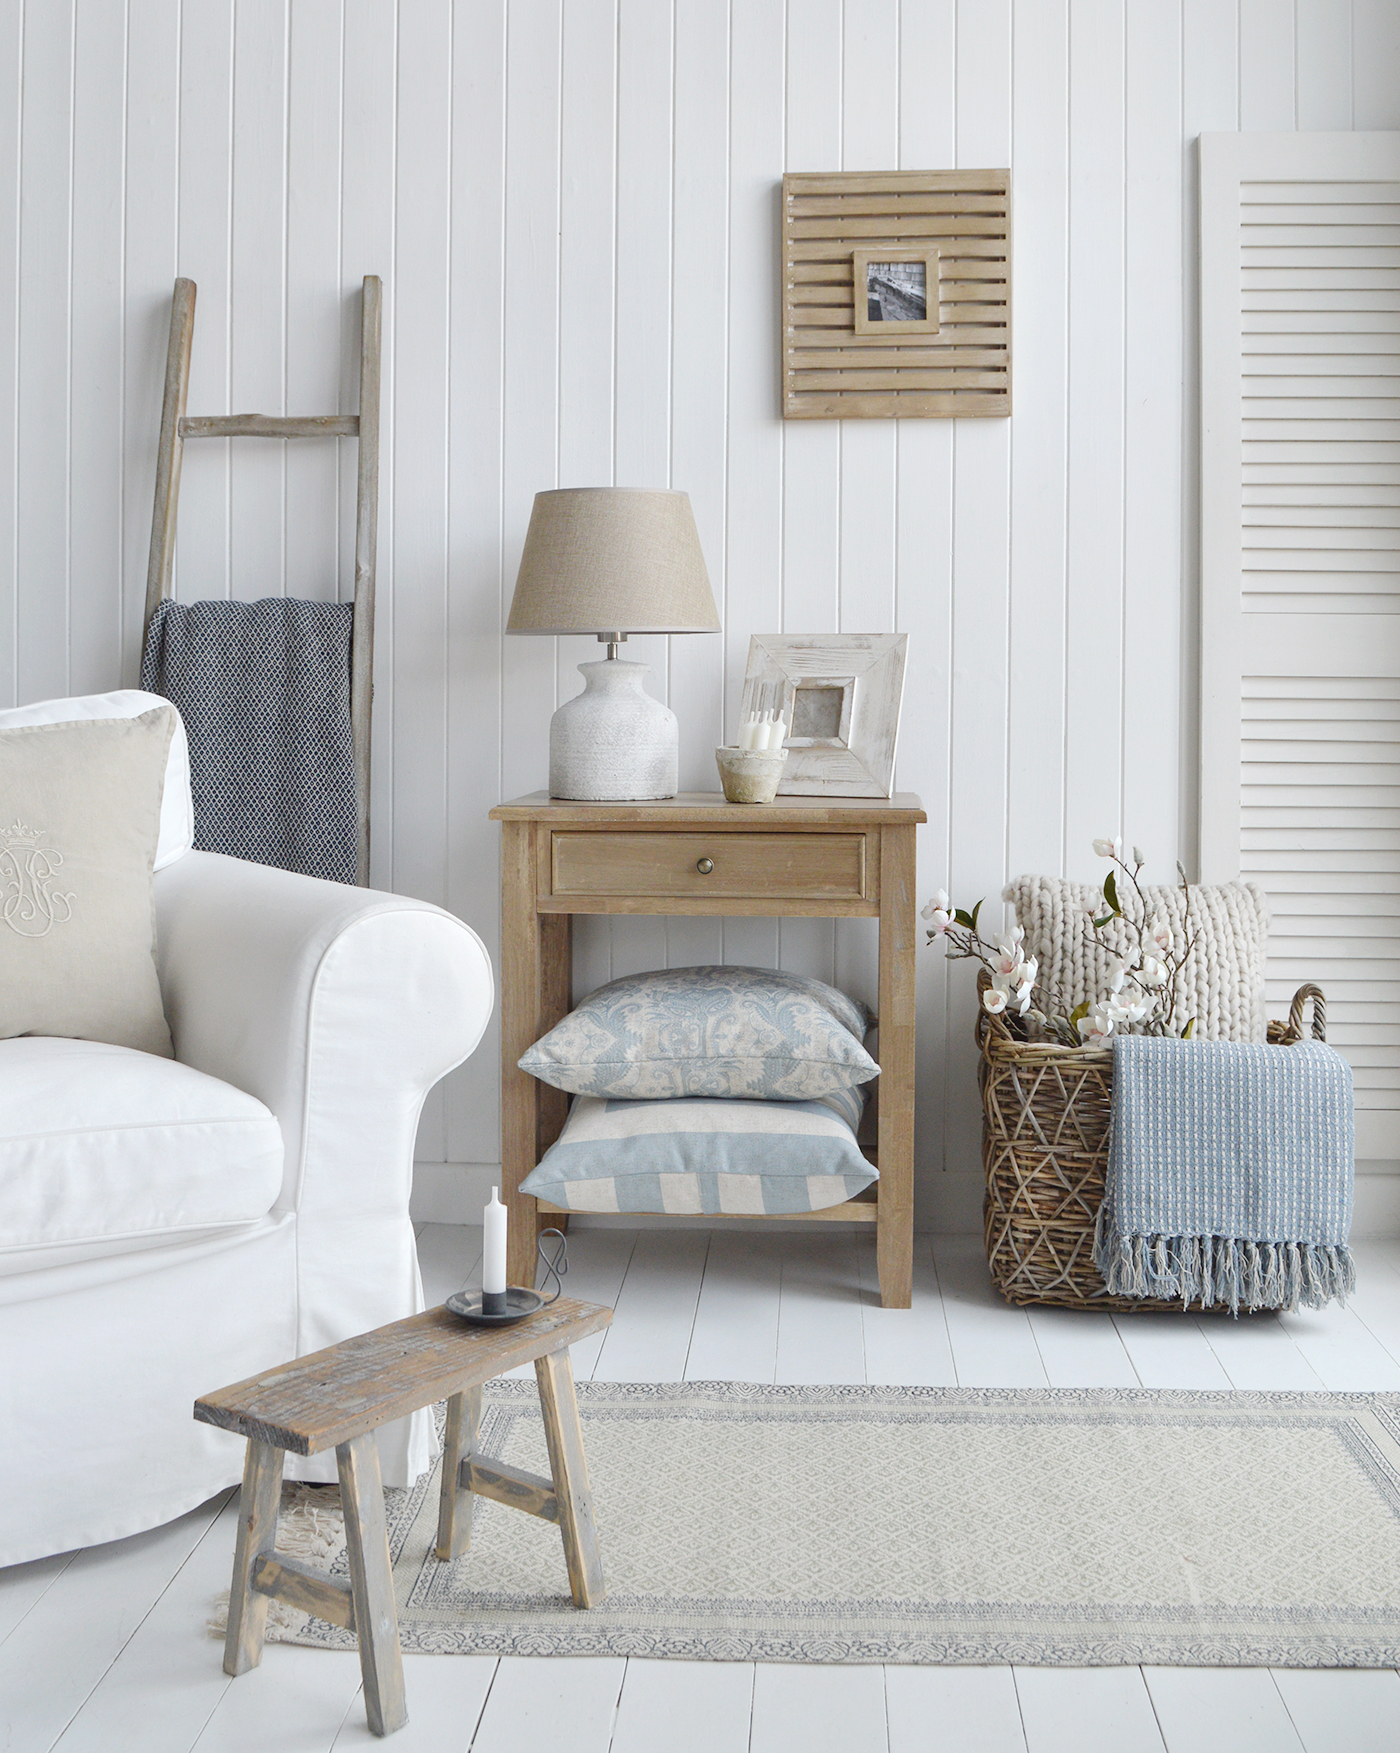 New England furniture for coastal, modern country and farmhouse style interiors for UK